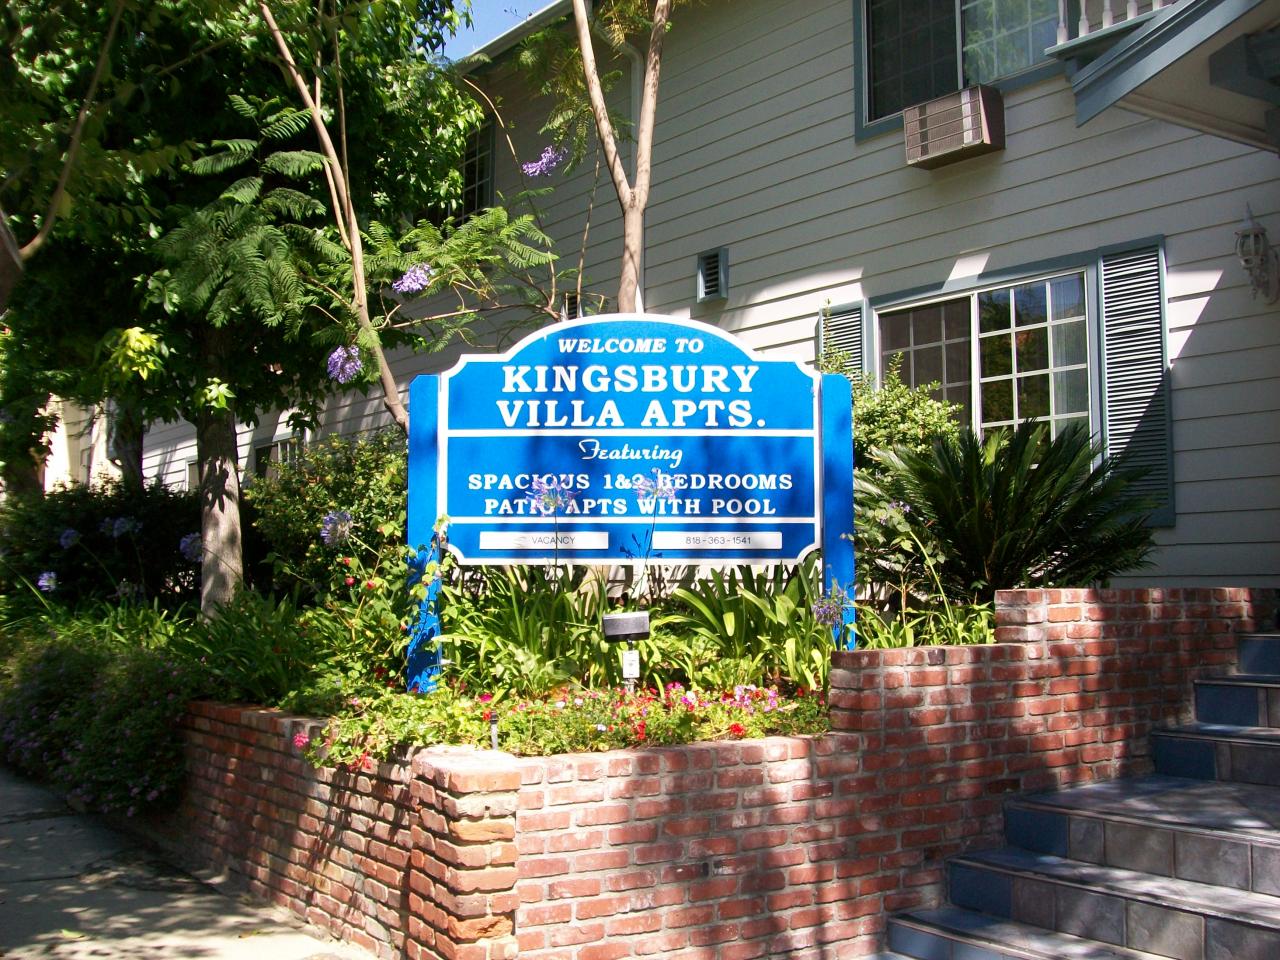 Photo of Kingsbury Villas Apartments - a view of the front sign area